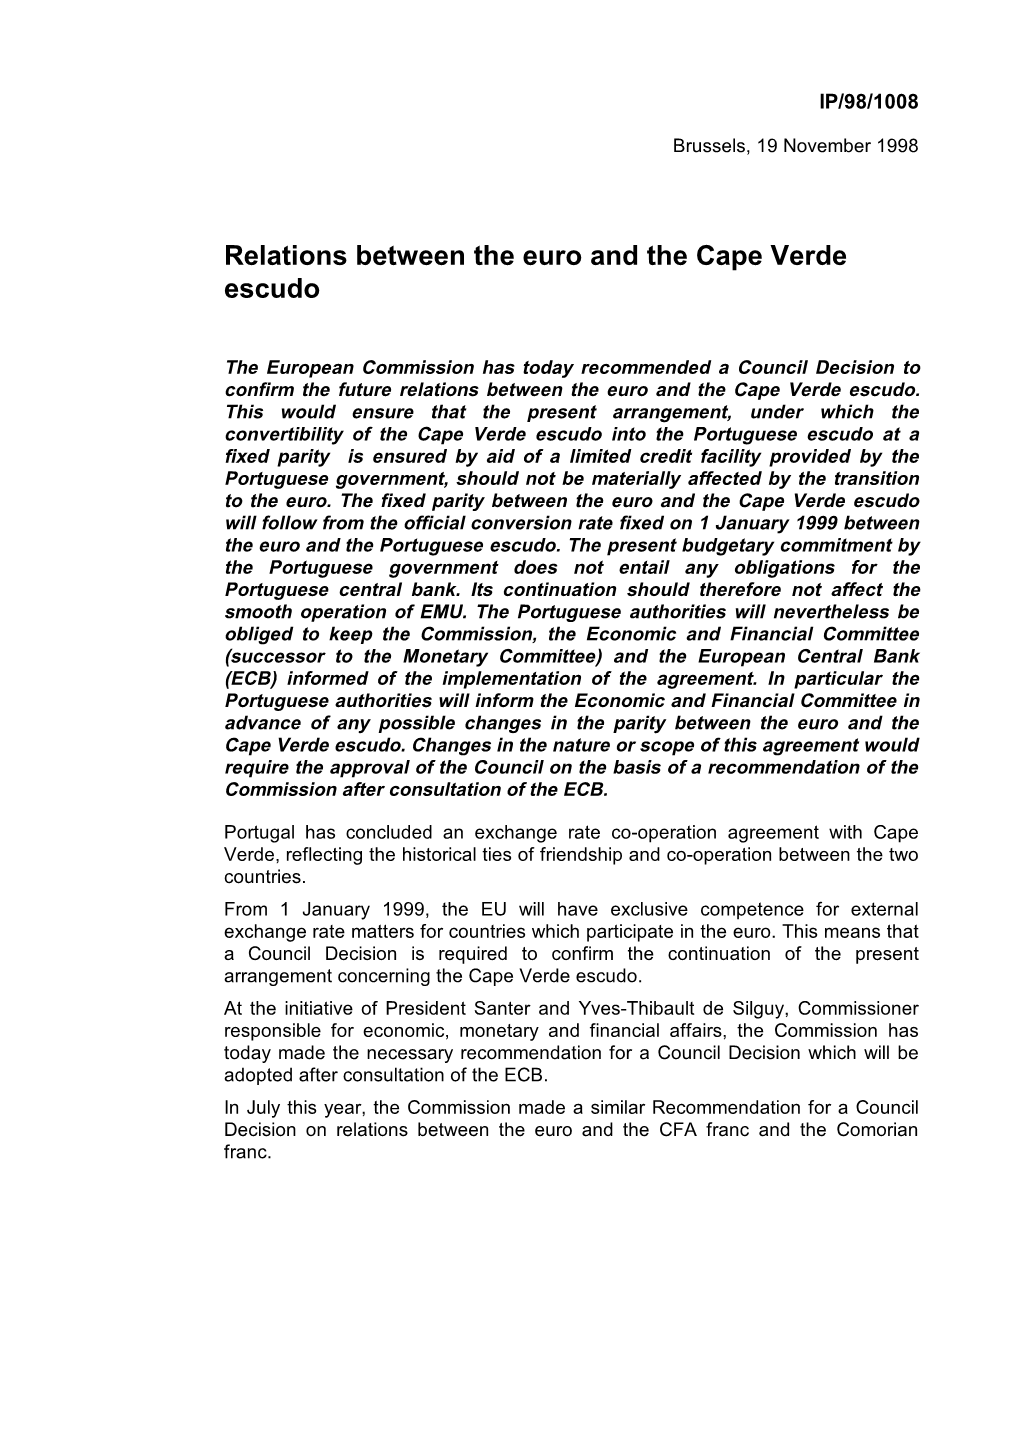 Relations Between the Euro and the Cape Verde Escudo